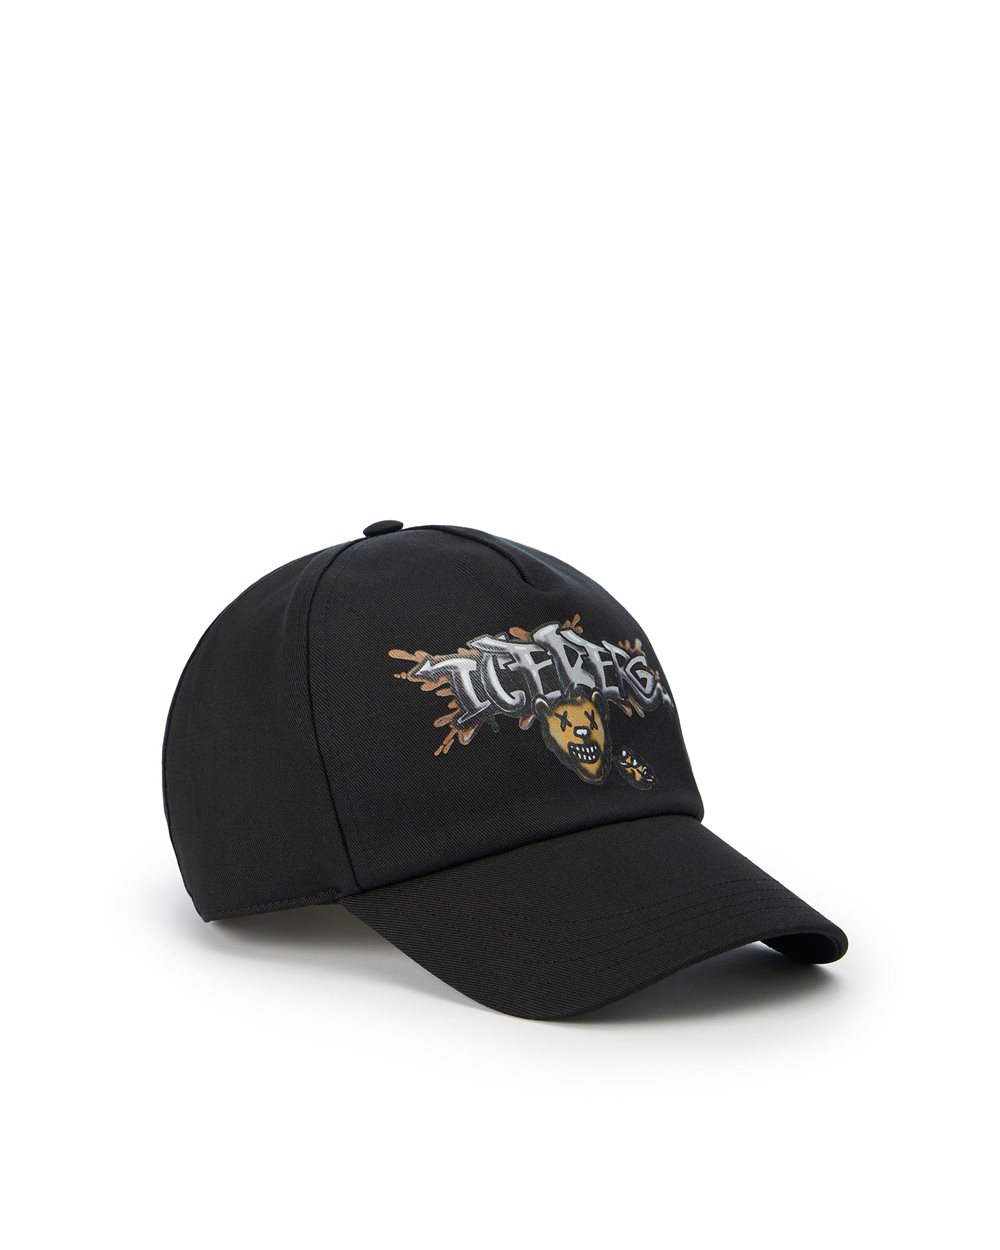 Baseball hat with cartoon graphics and logo - Accessories | Iceberg - Official Website